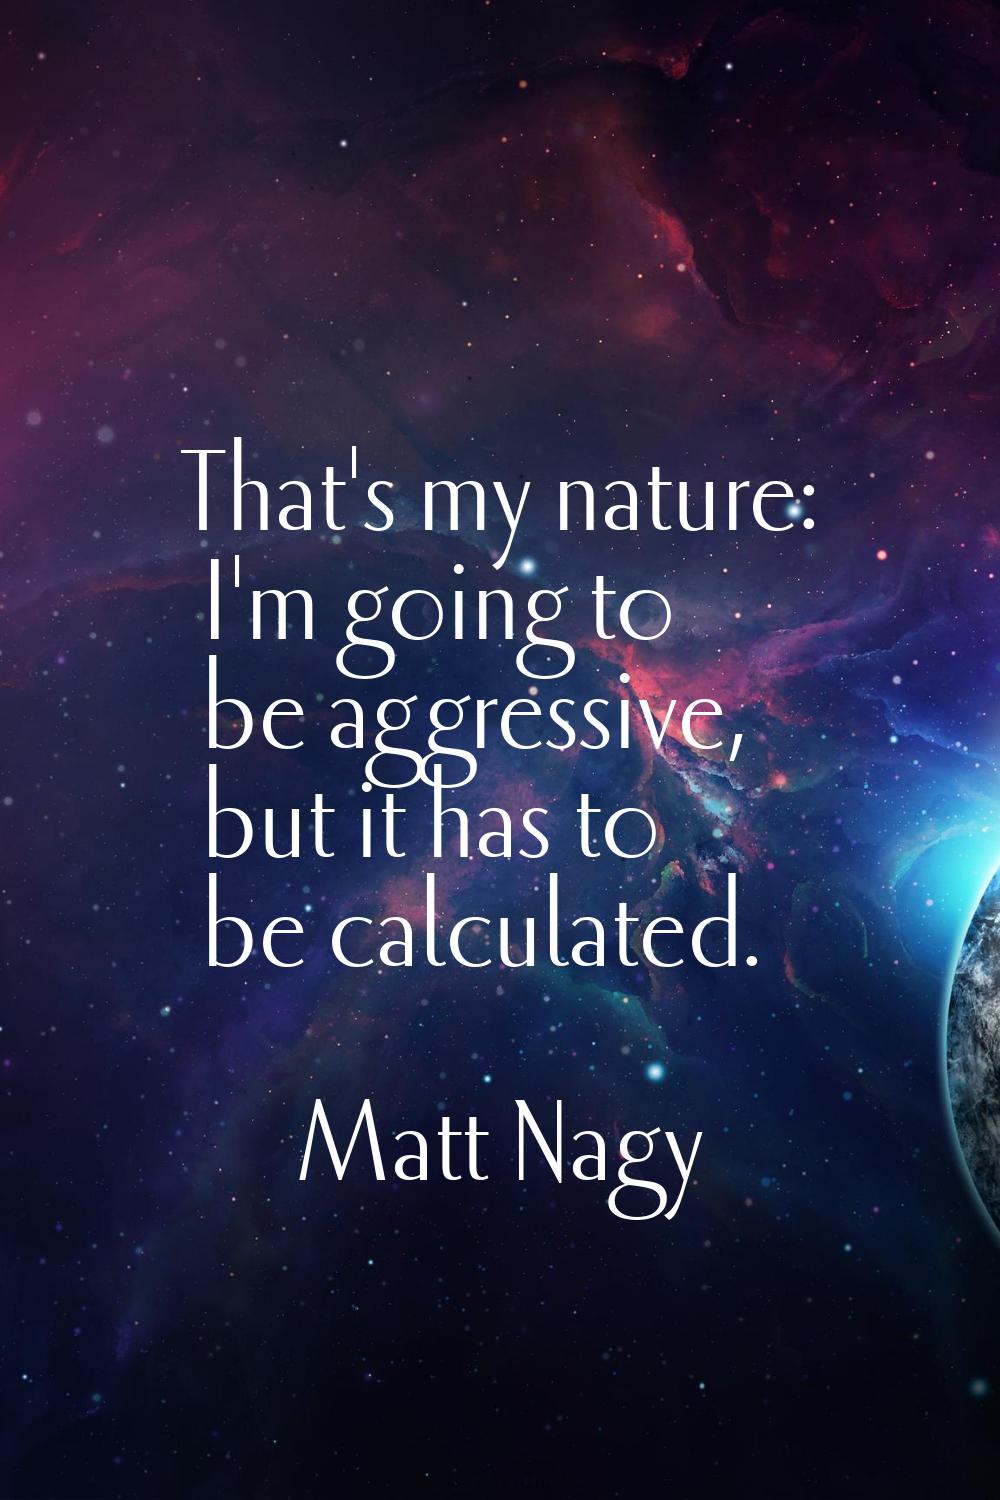 That's my nature: I'm going to be aggressive, but it has to be calculated.